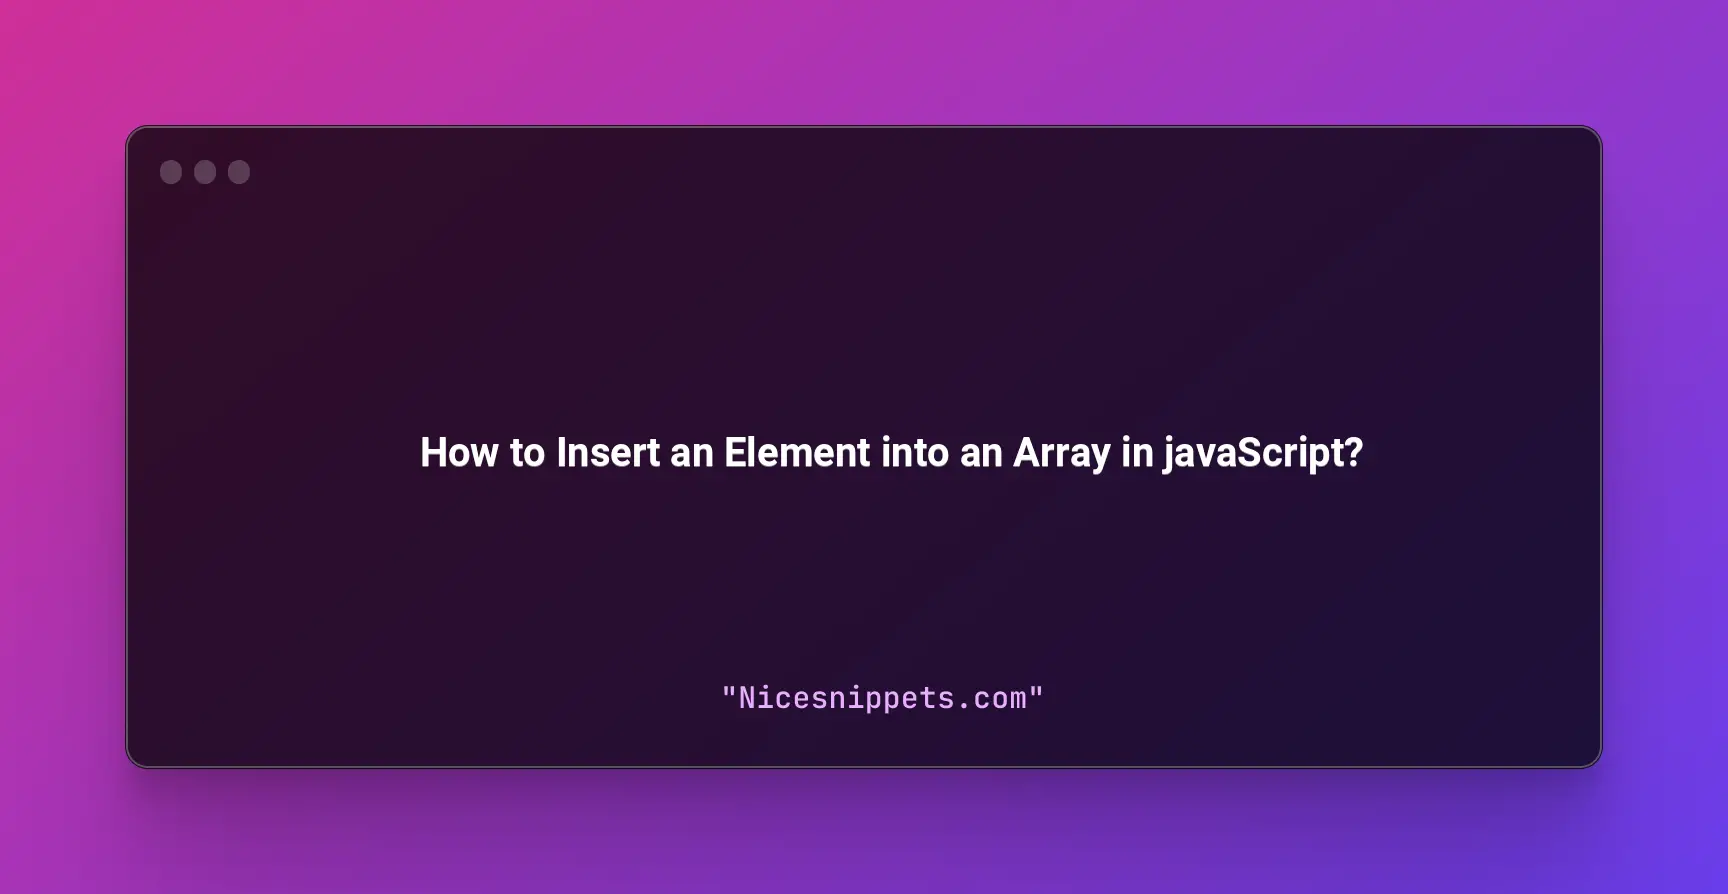 How to Insert an Element into an Array in javaScript?